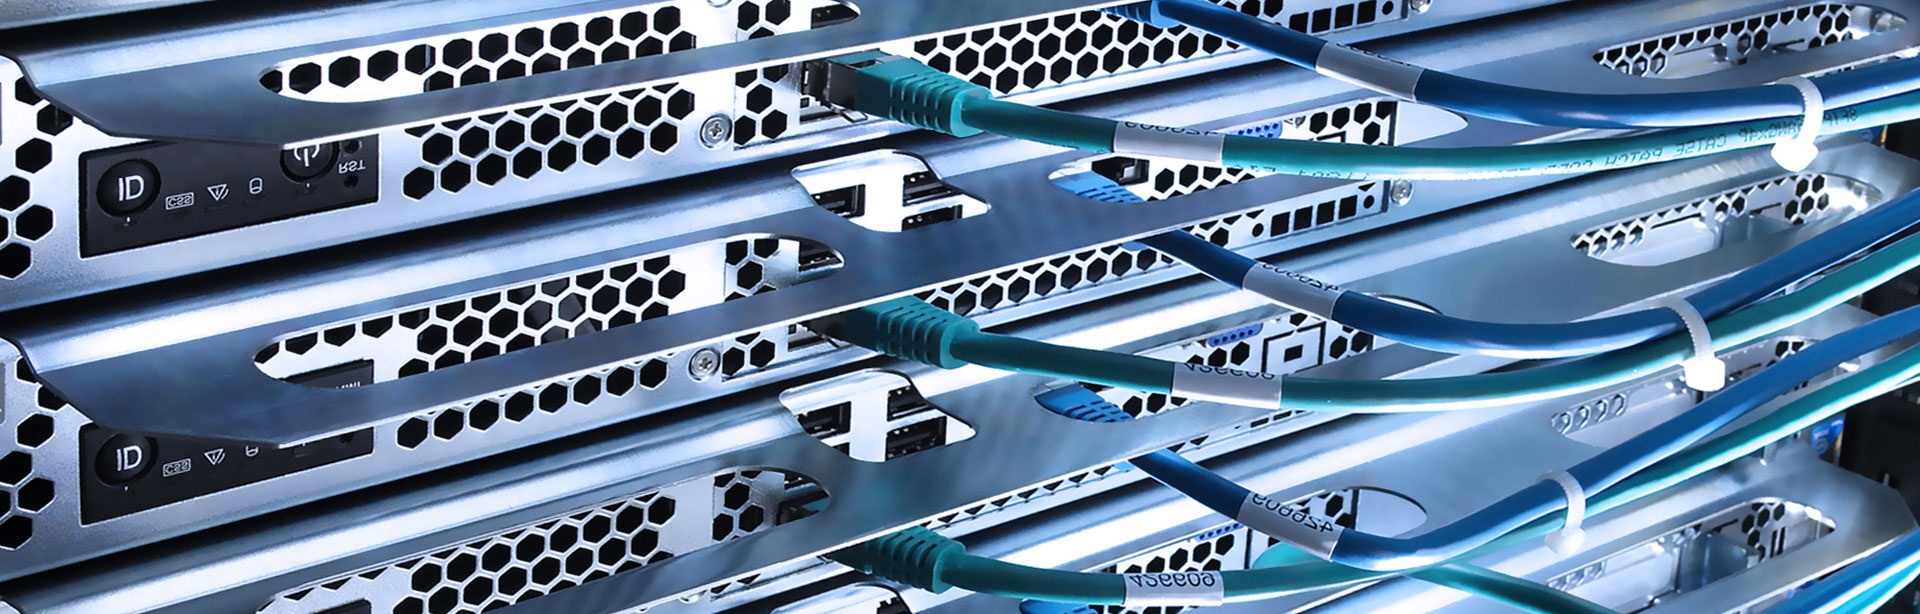 Patterson Louisiana Superior Voice & Data Network Cabling Services